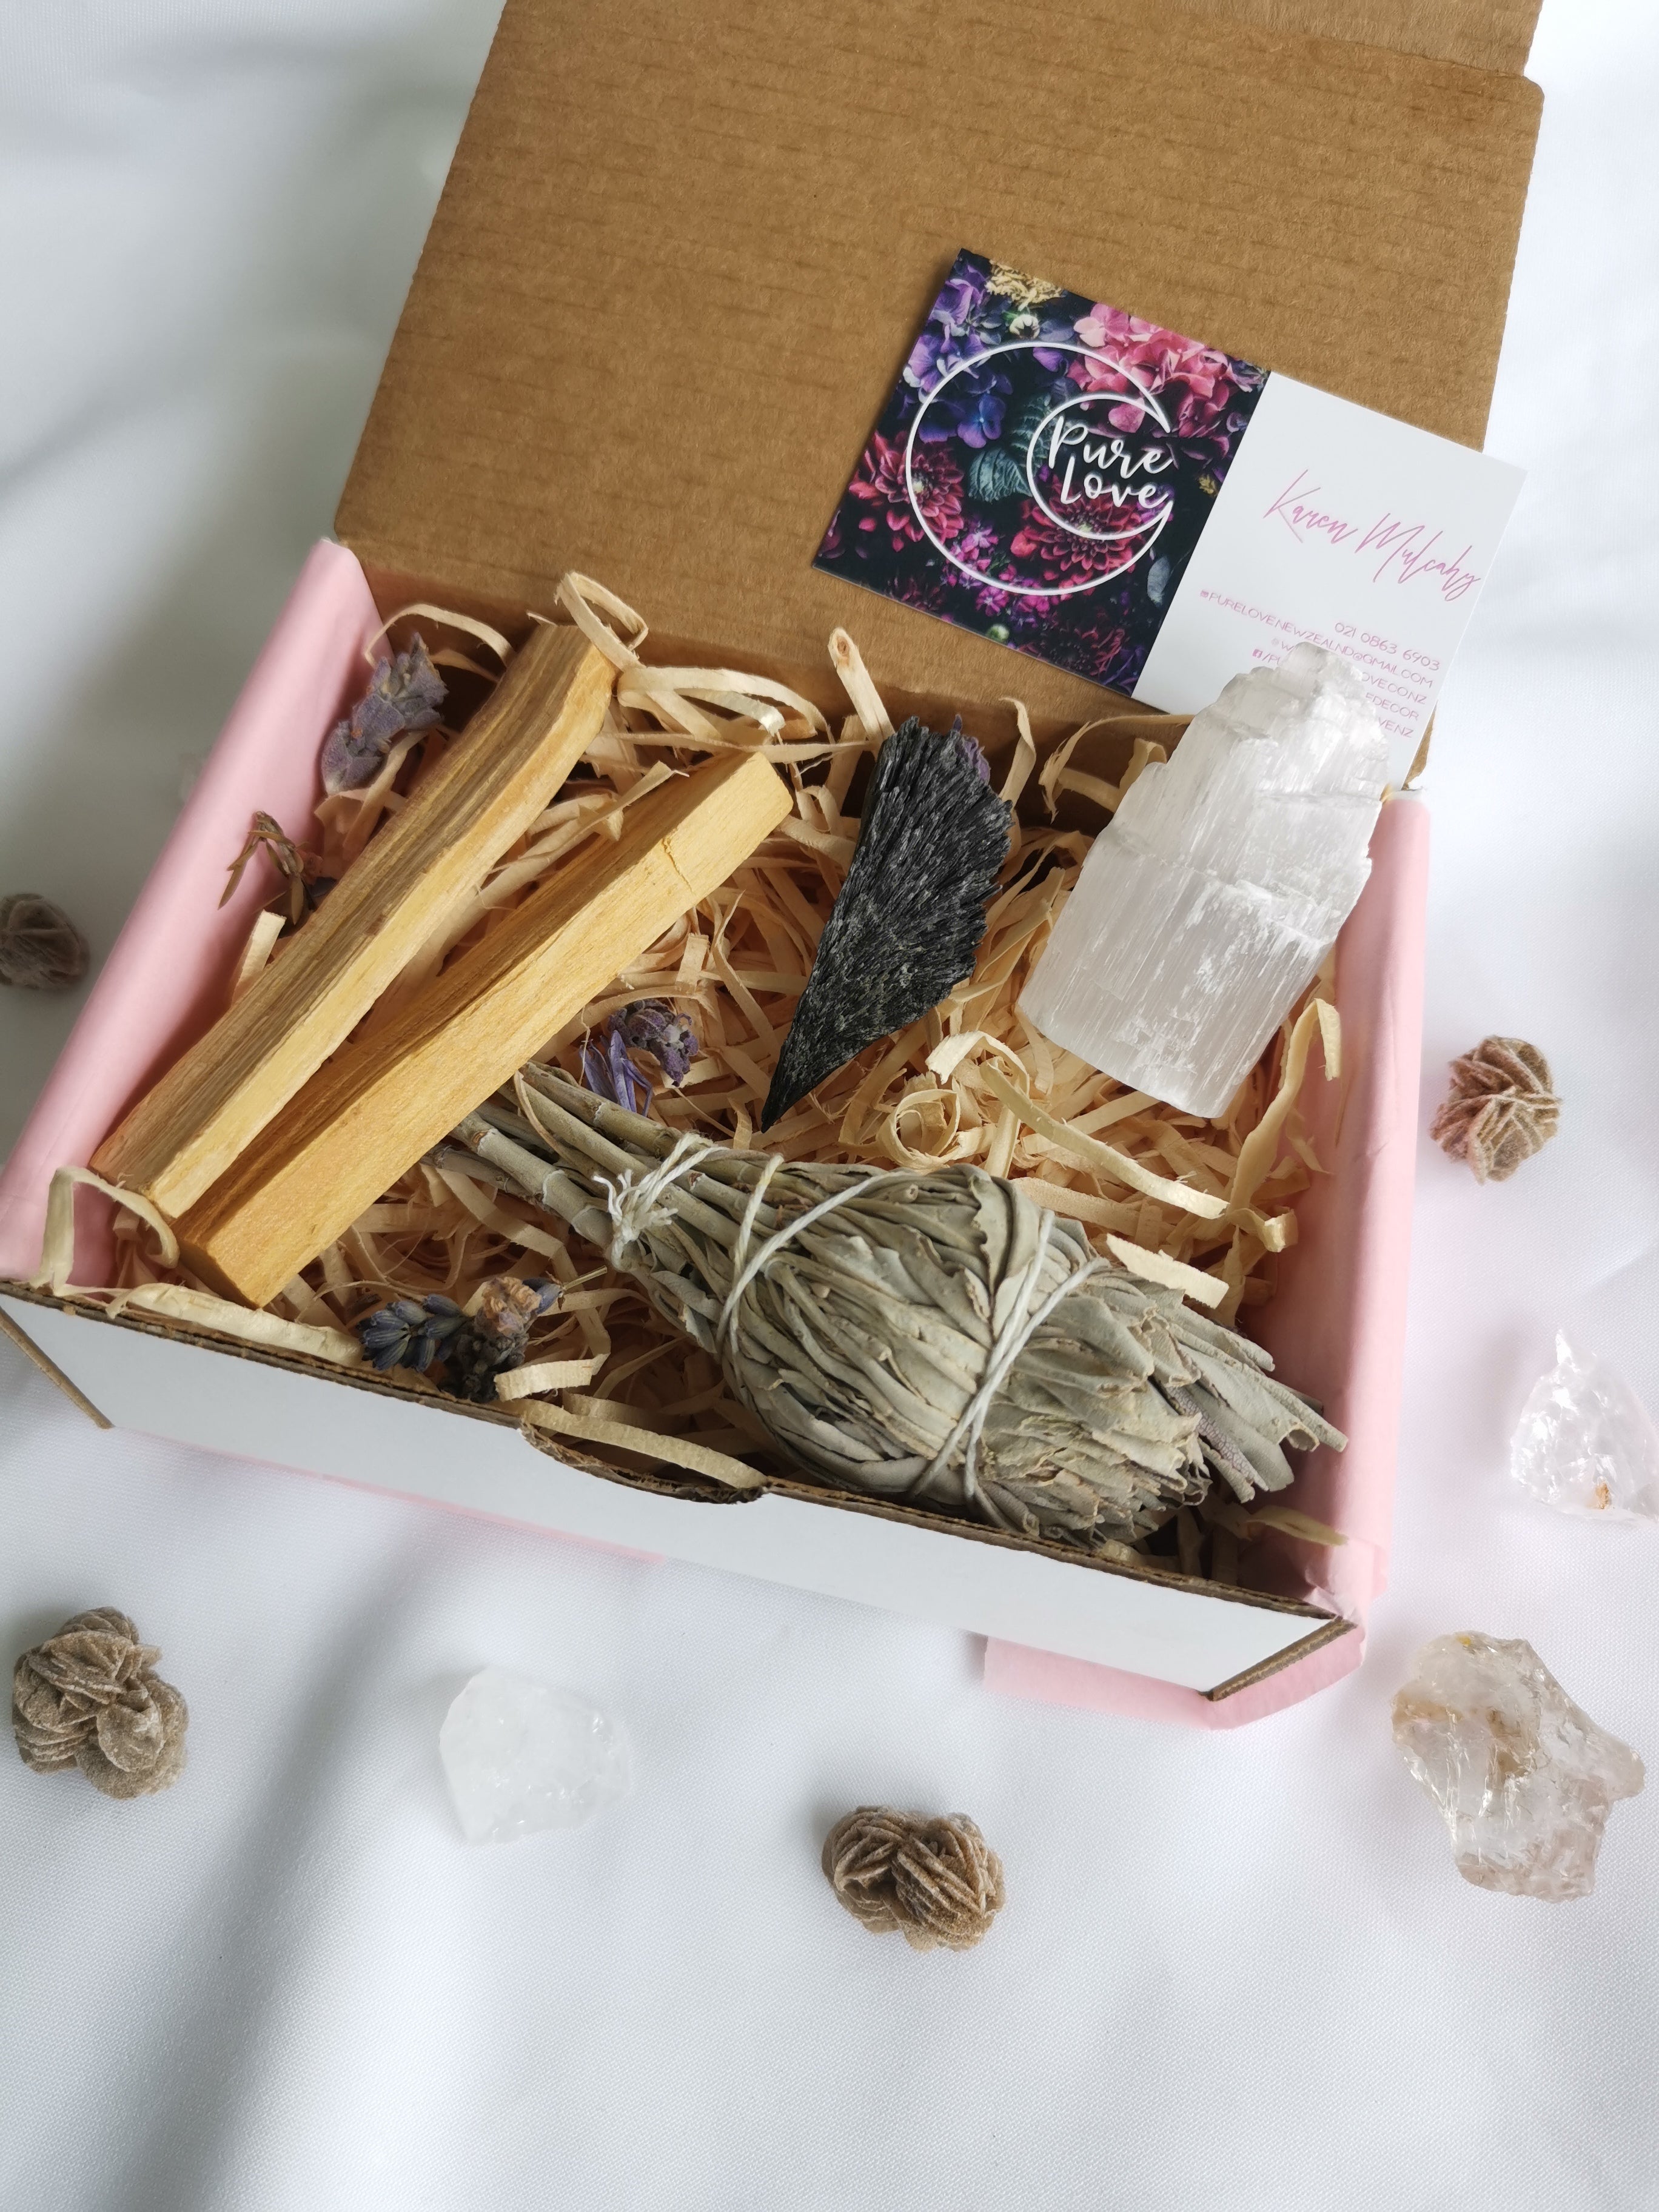 Cleanse and charge Gift Box